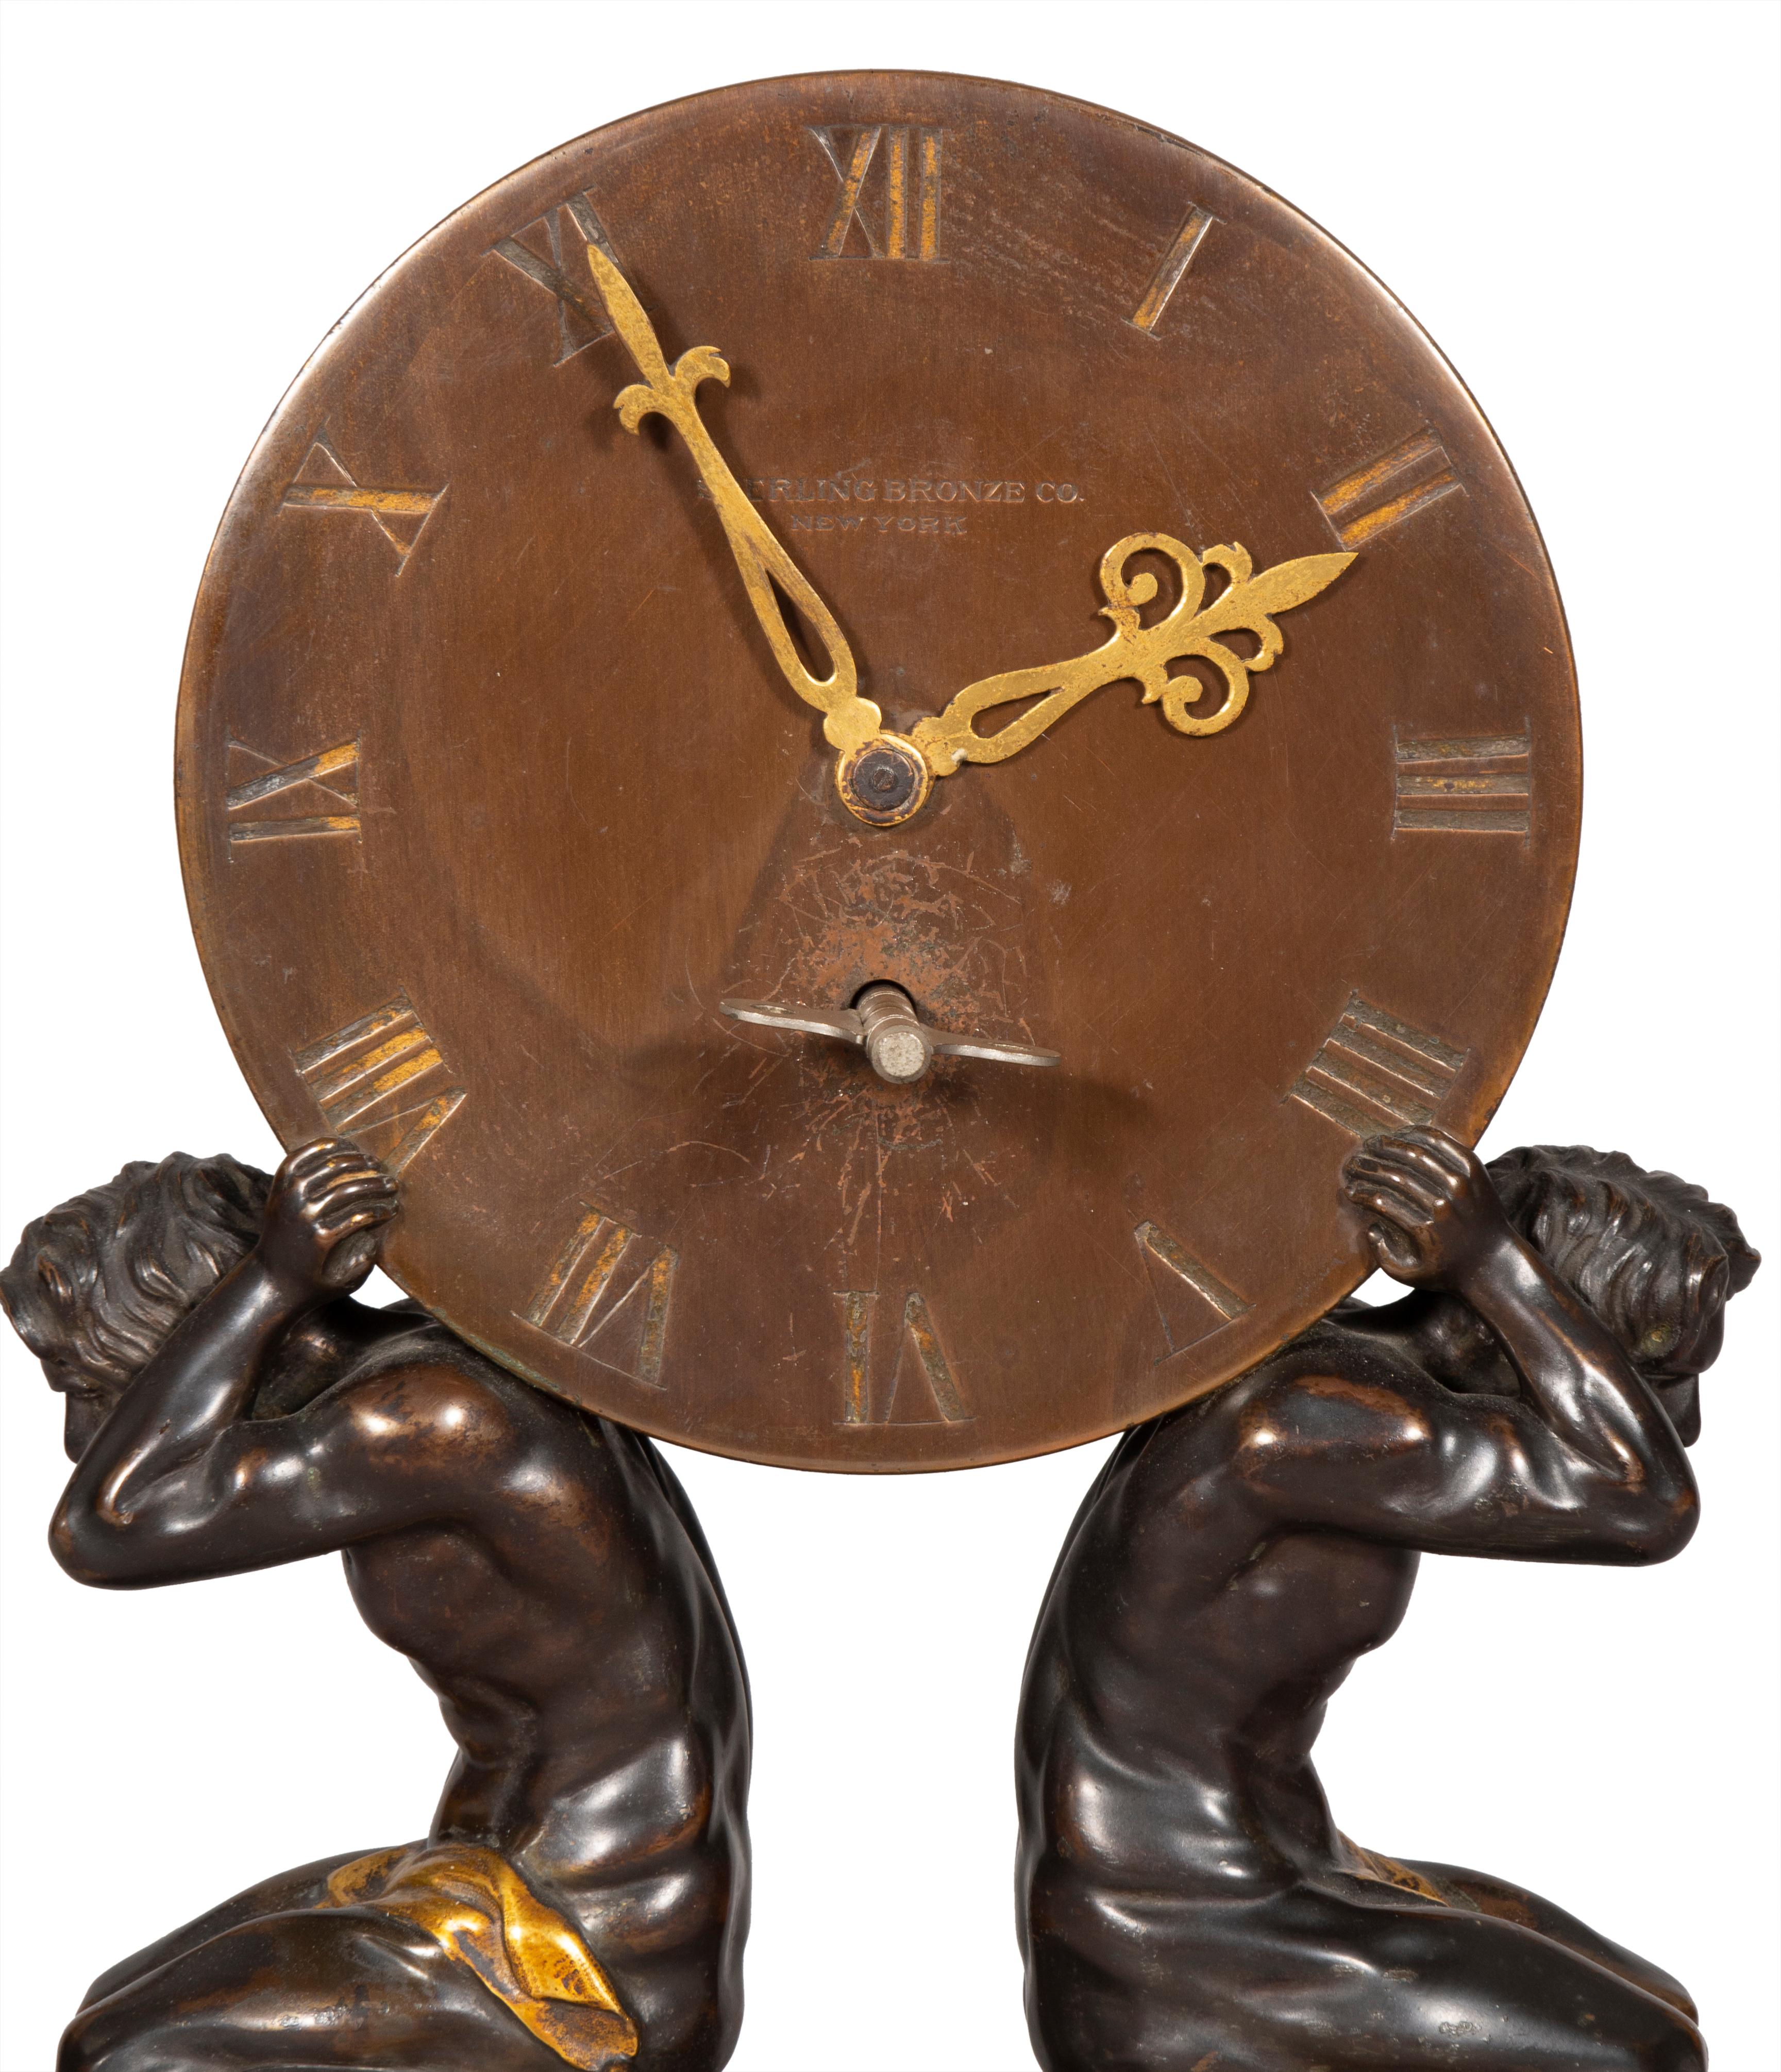 Brass Sterling Bronze Company Mantle Clock For Sale